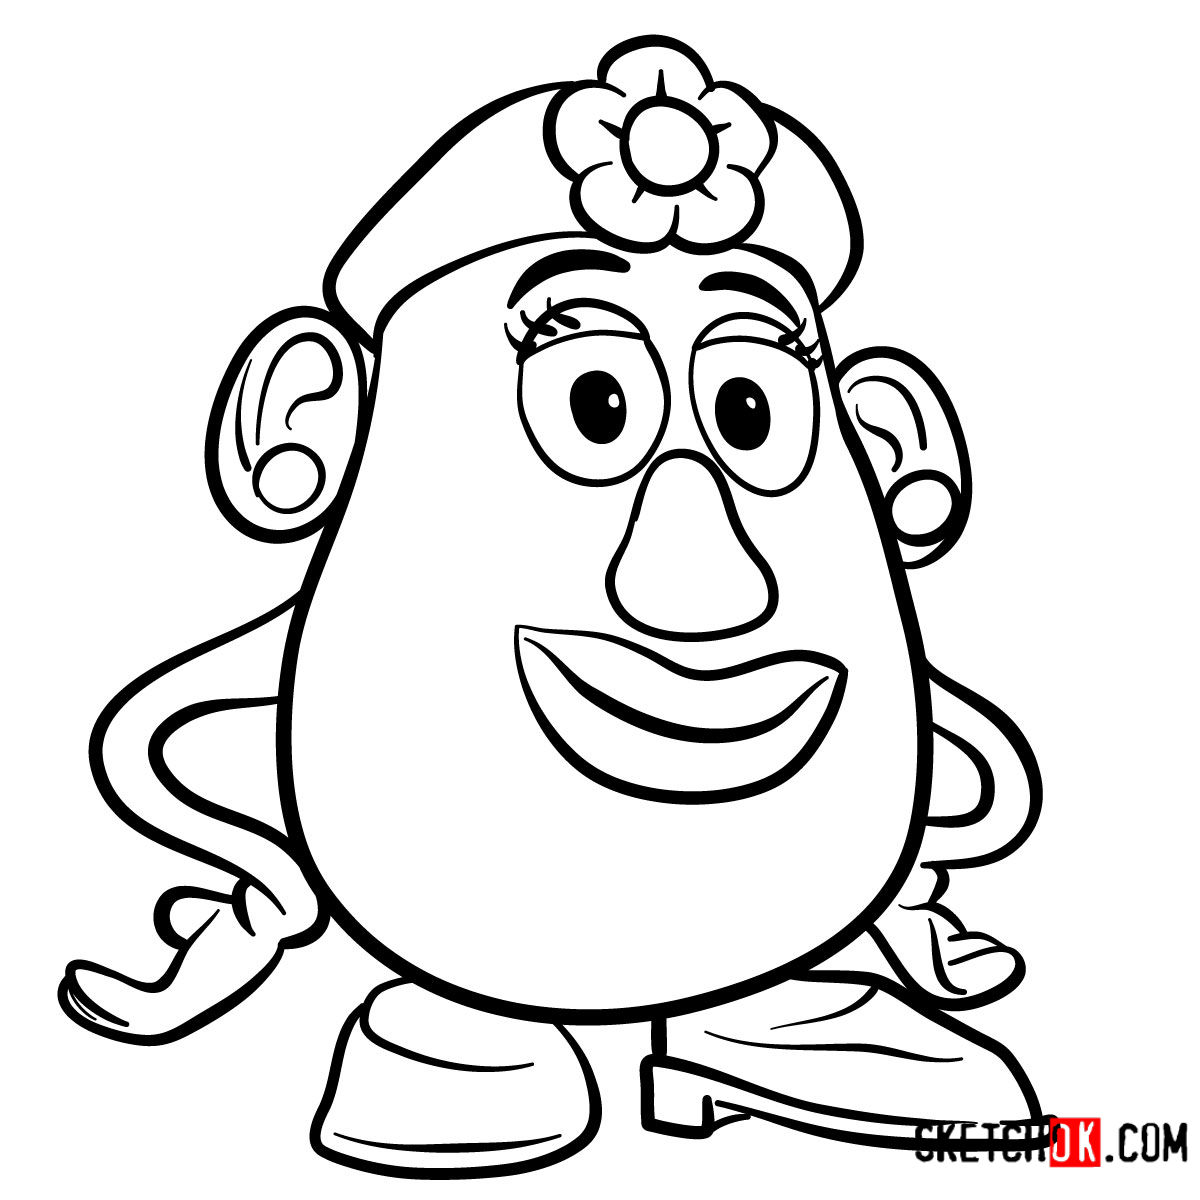 How to draw Mrs. Potato Head from Toy Story